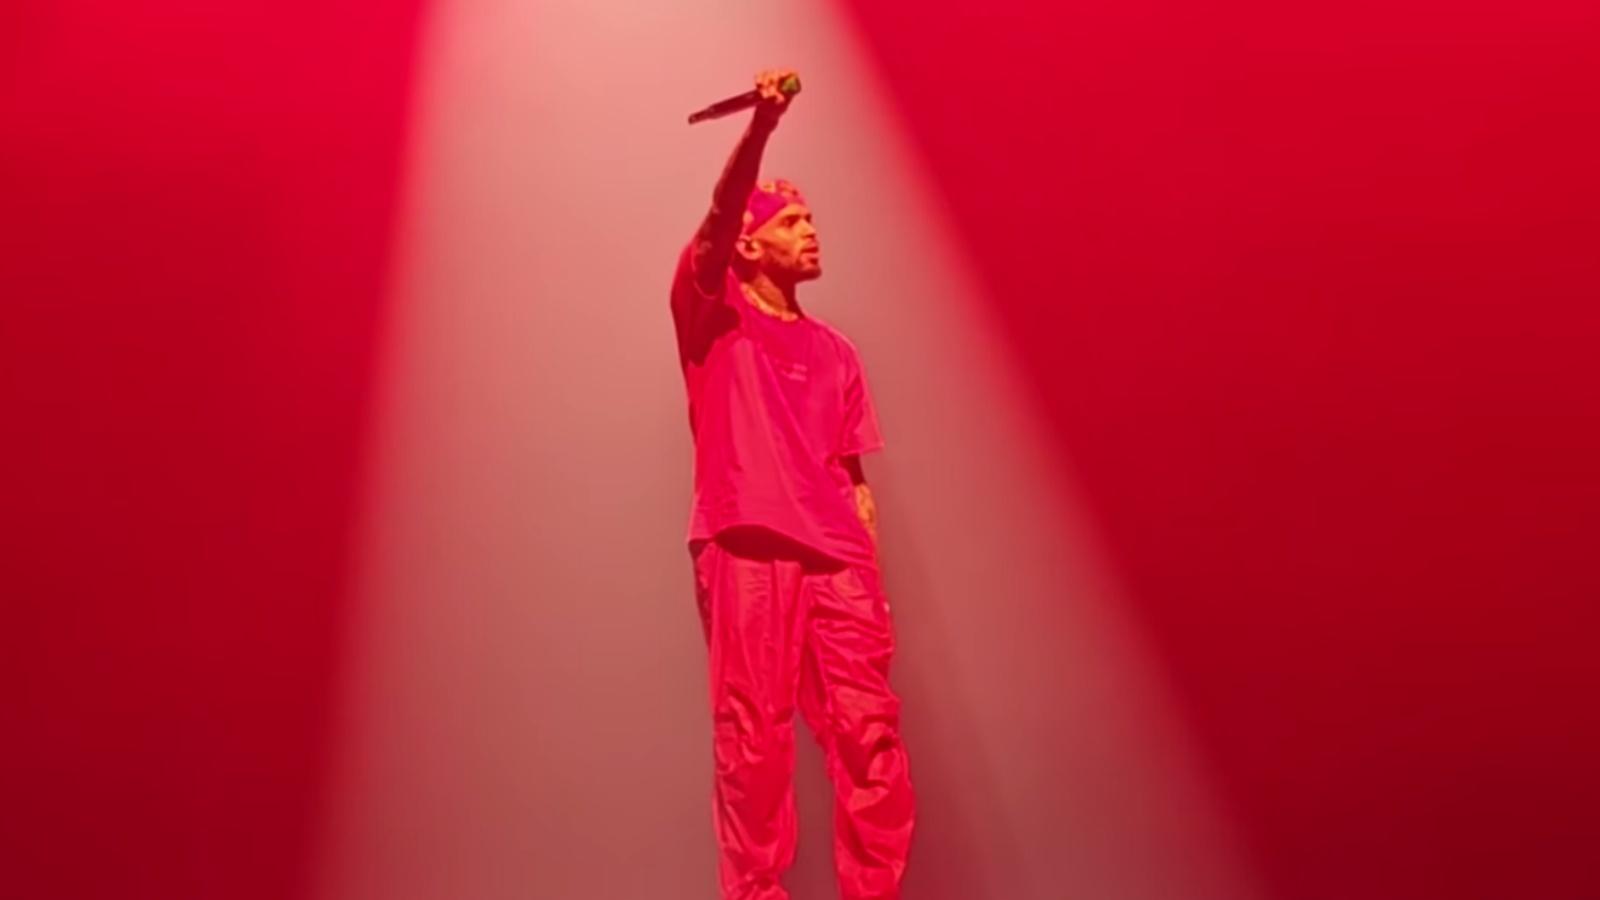 Chris Brown performing in red light on a stage in London